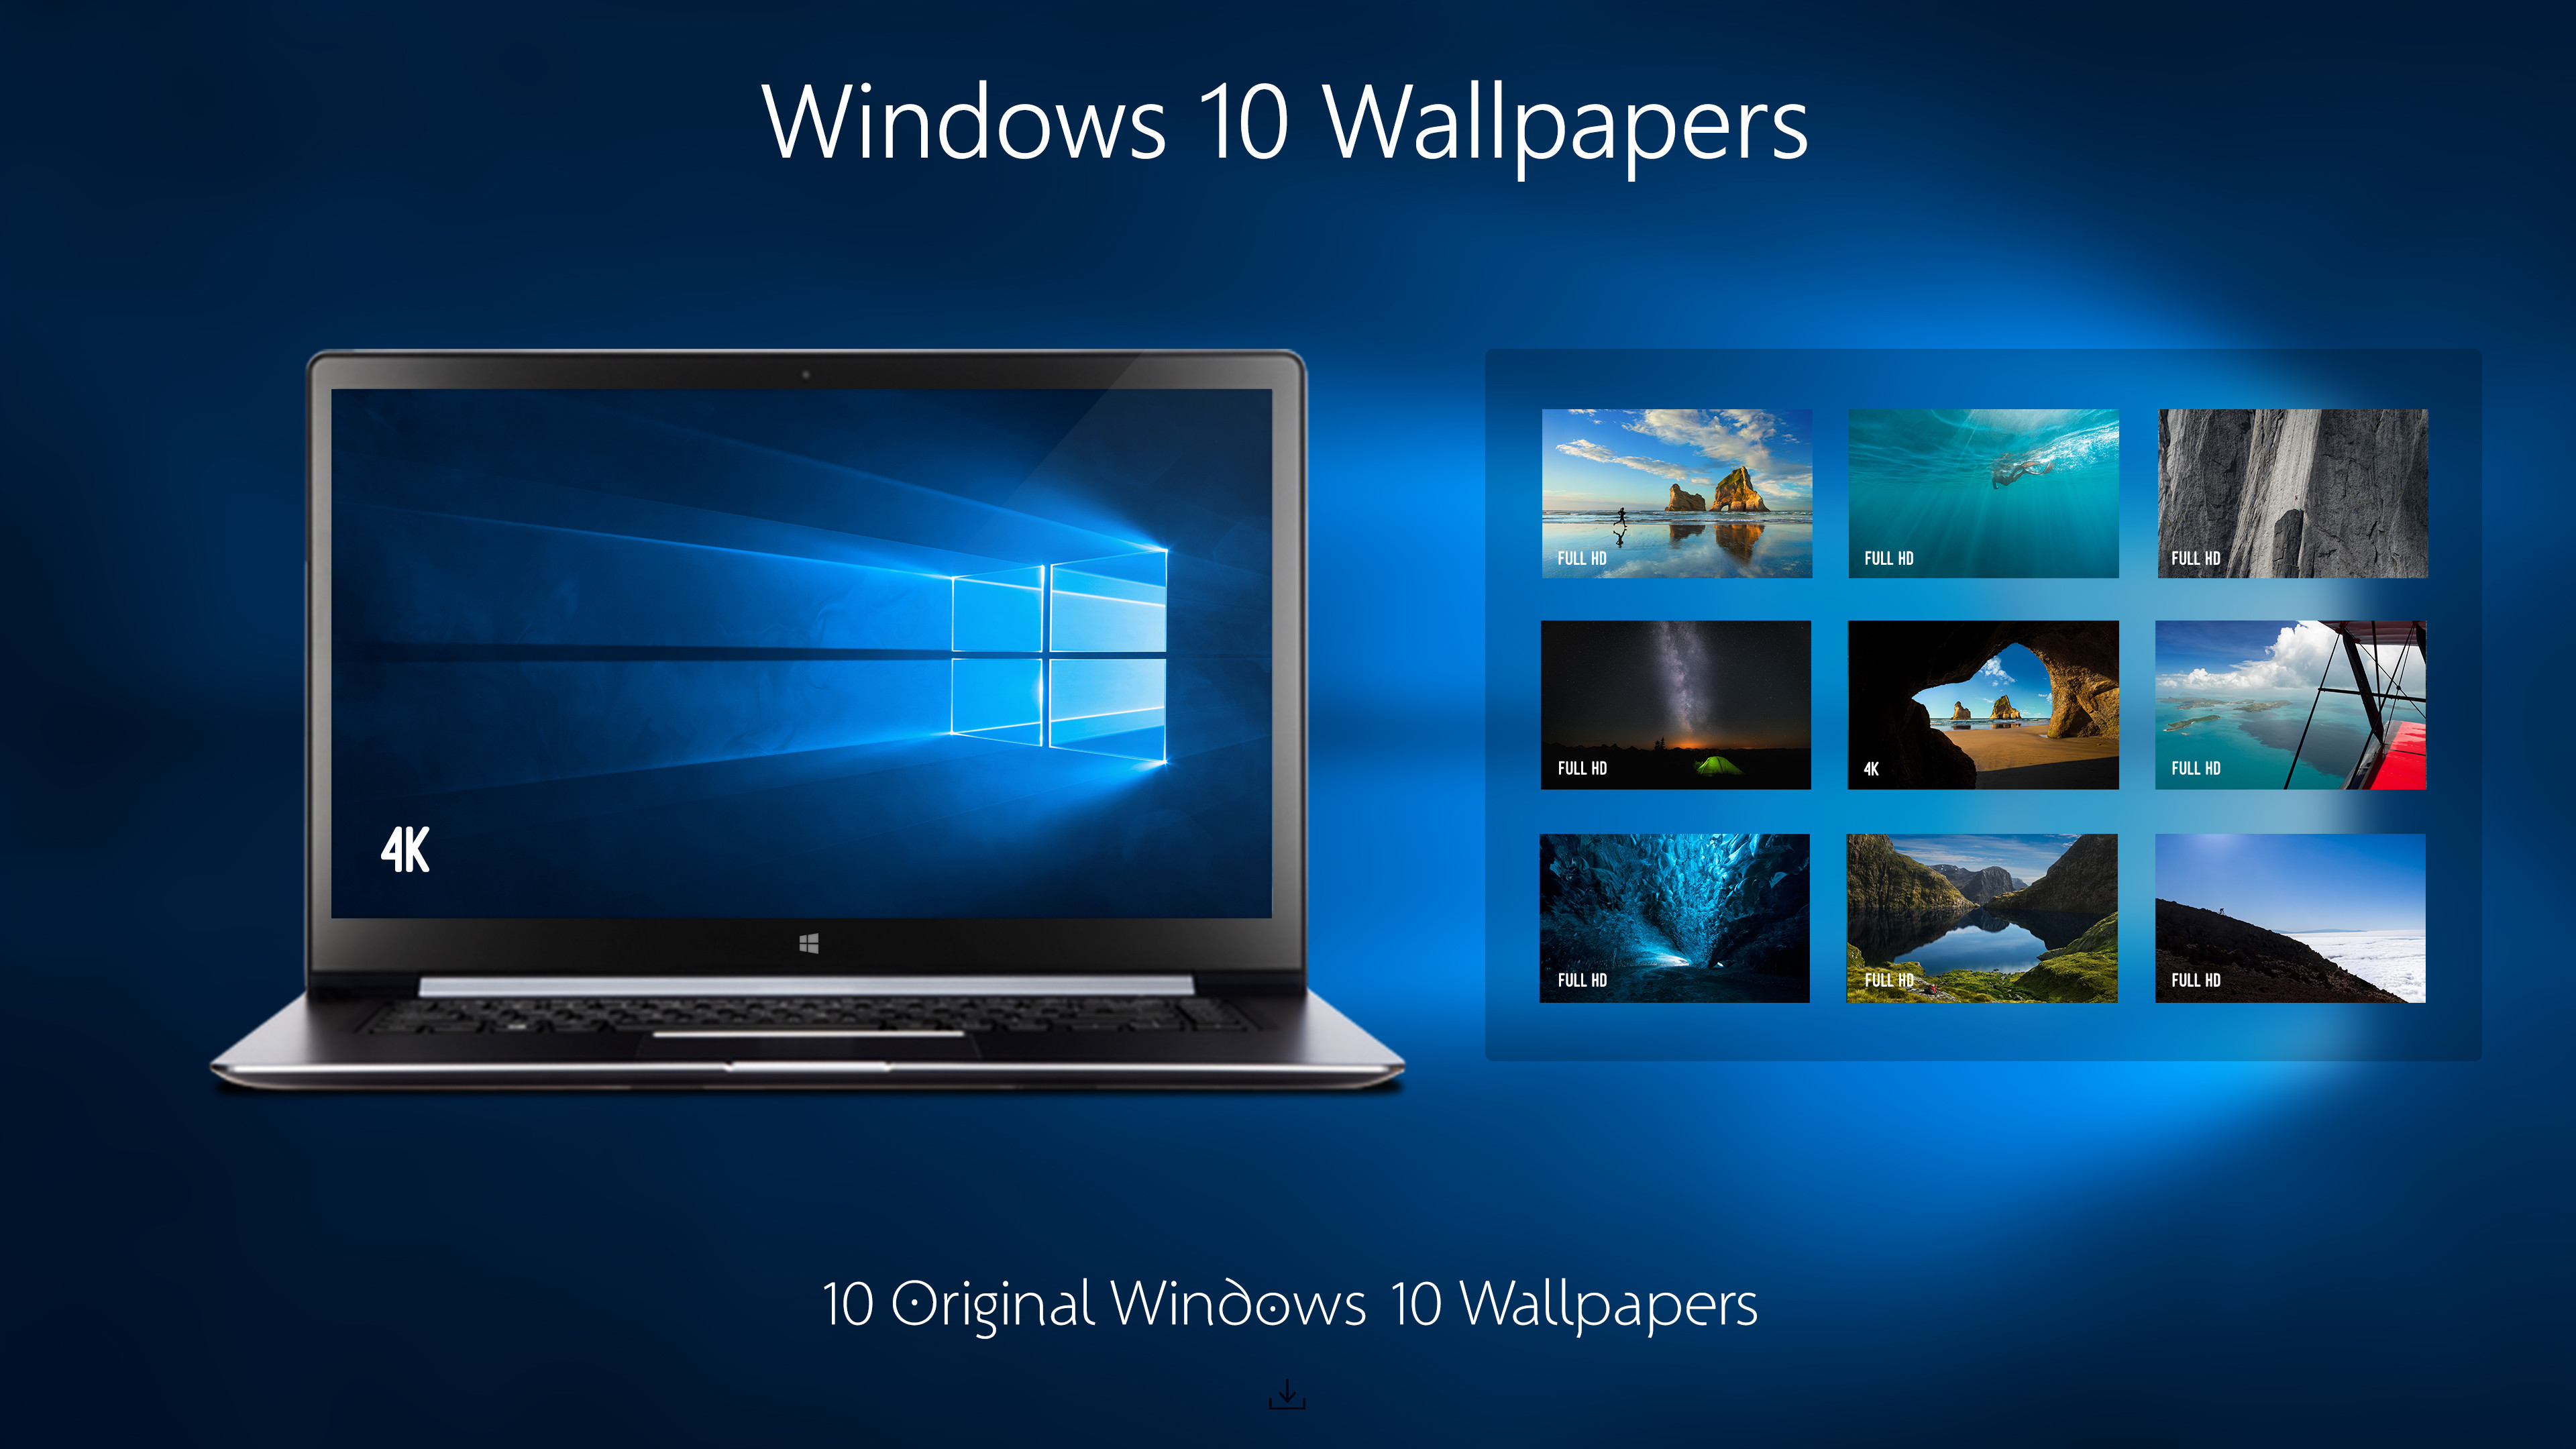 3840x2160 ... Windwos 10 Original Wallpapers 4K by armend07